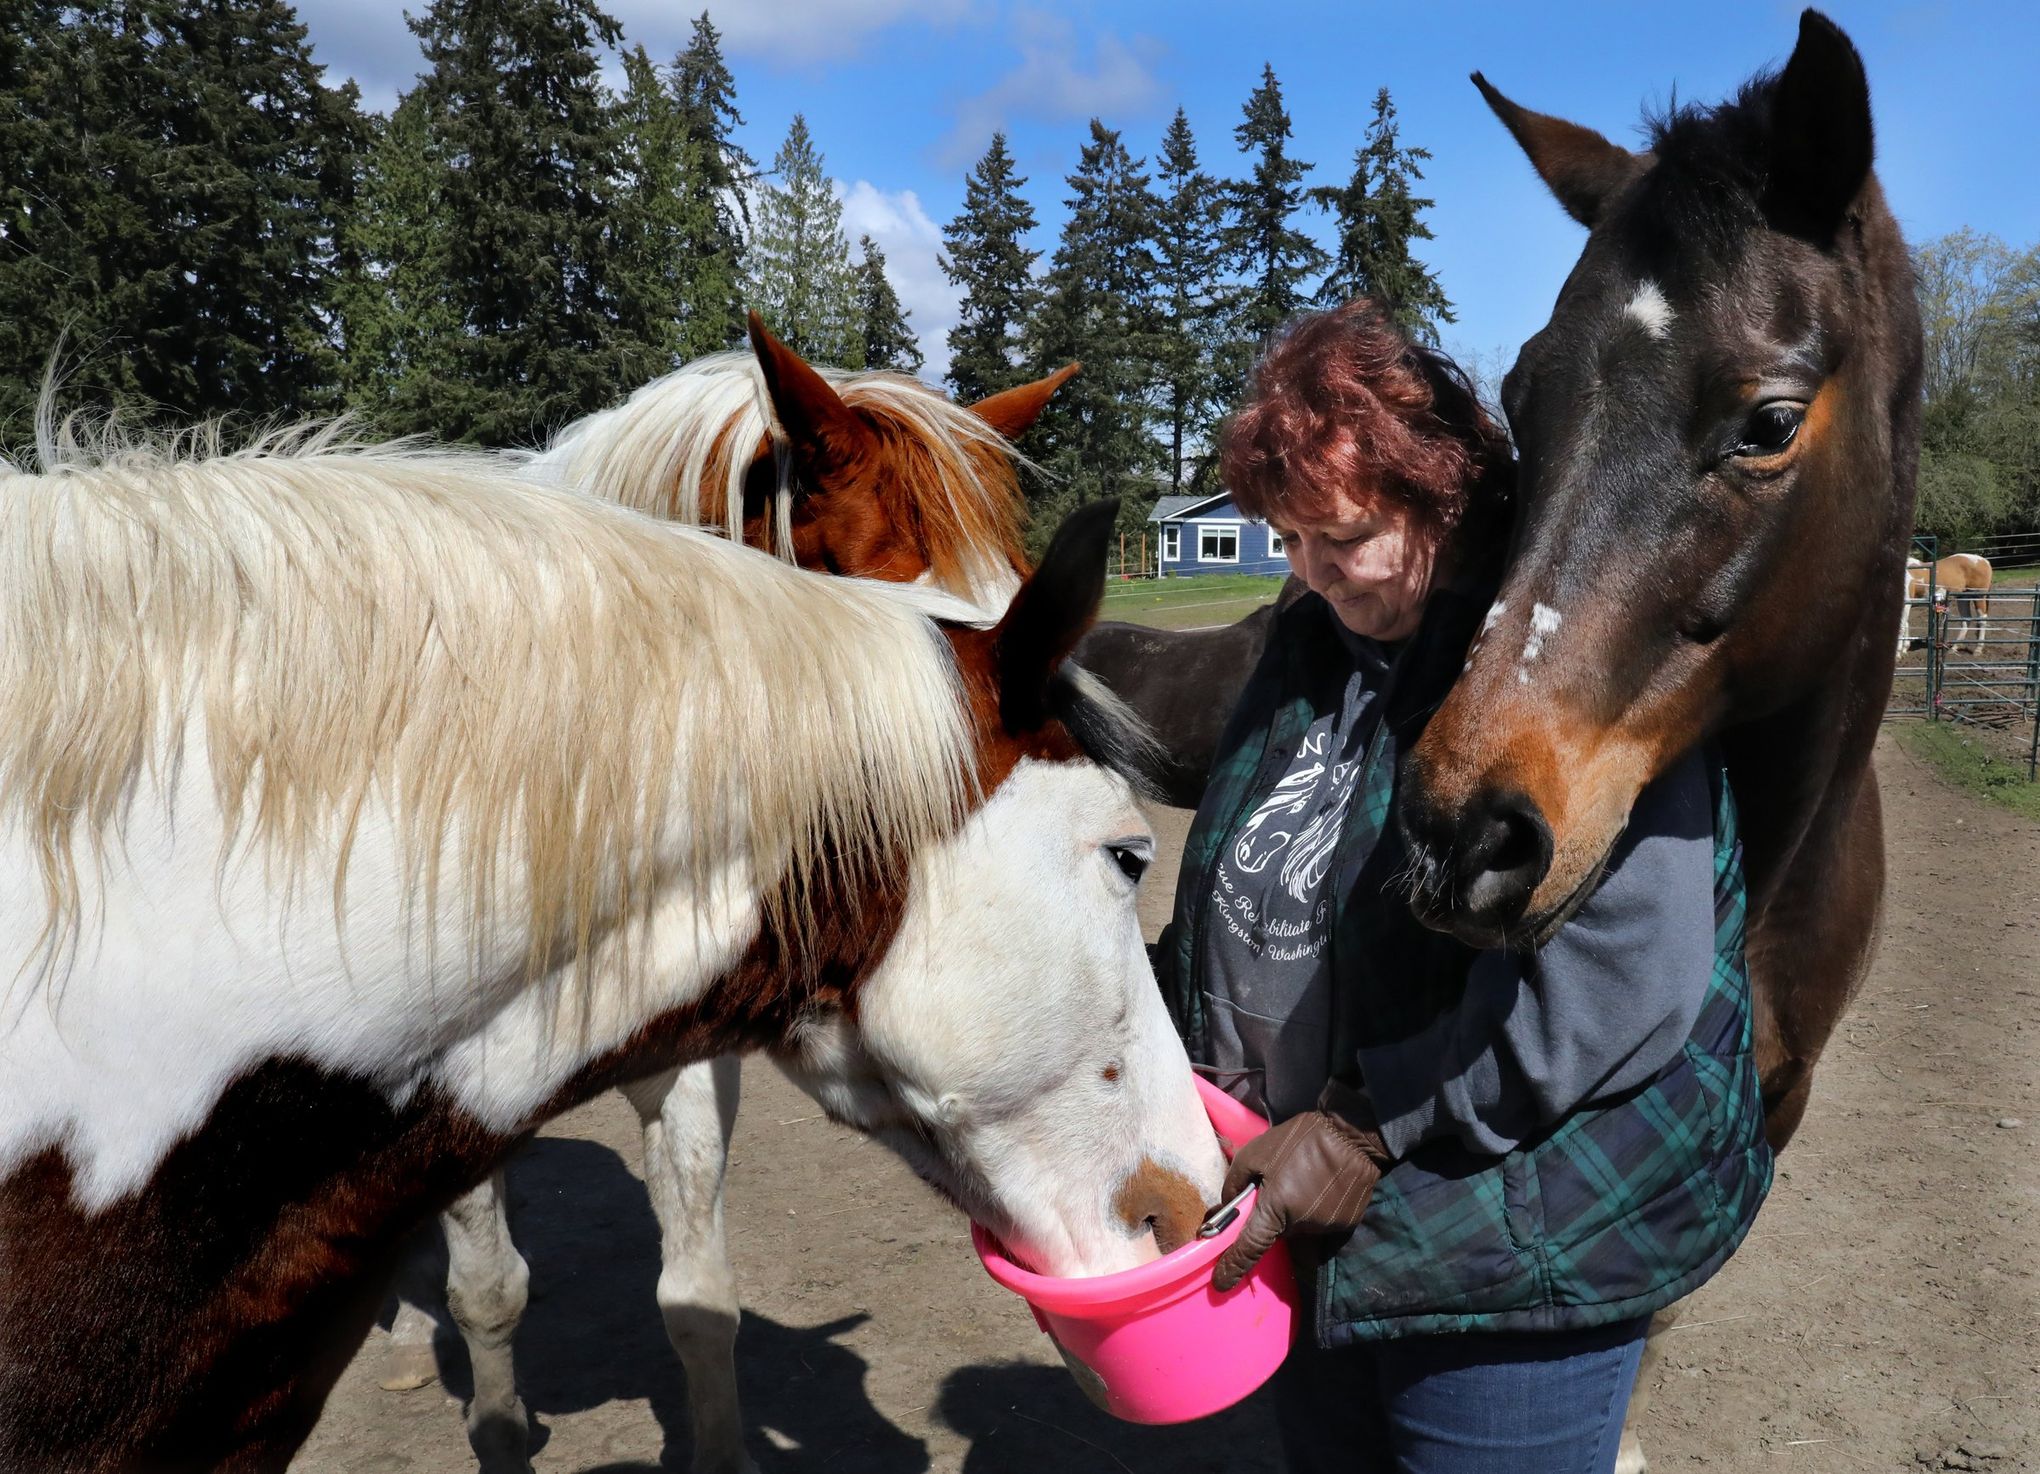 Put out to pasture no more, Kitsap horse rescue Toni's Ponies gets 2nd  lease on life